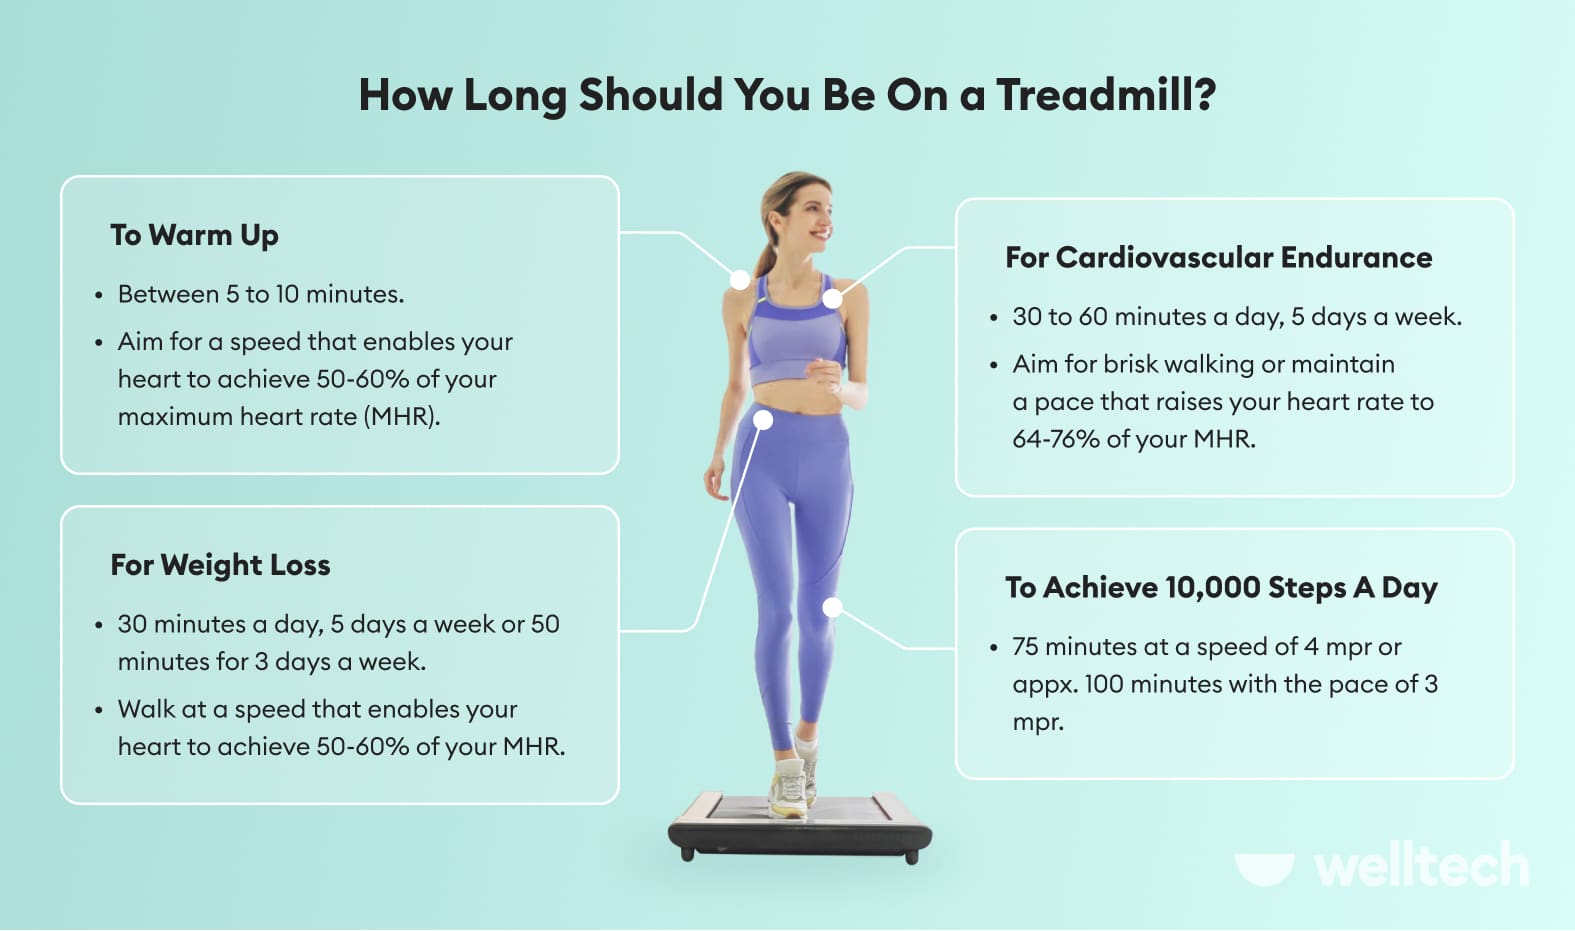 time you should spend on a treadmill depending on your goal, to warm up, cardio, weight loss, walking 10 thousand steps, how long should i walk on a treadmill